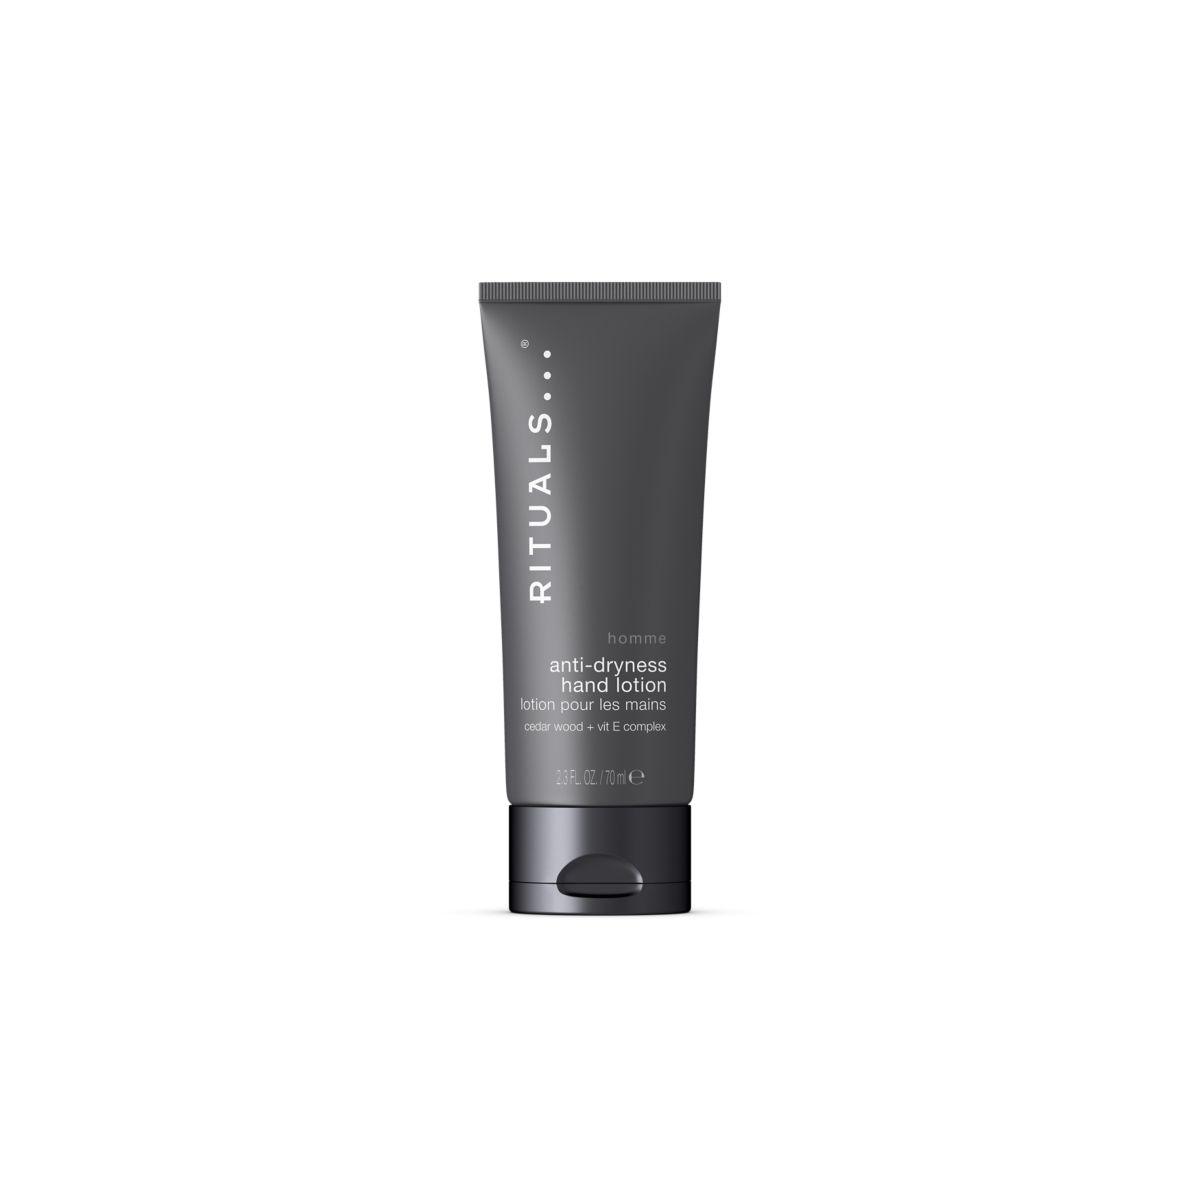 Rituals Homme Anti-Dryness Hand Lotion